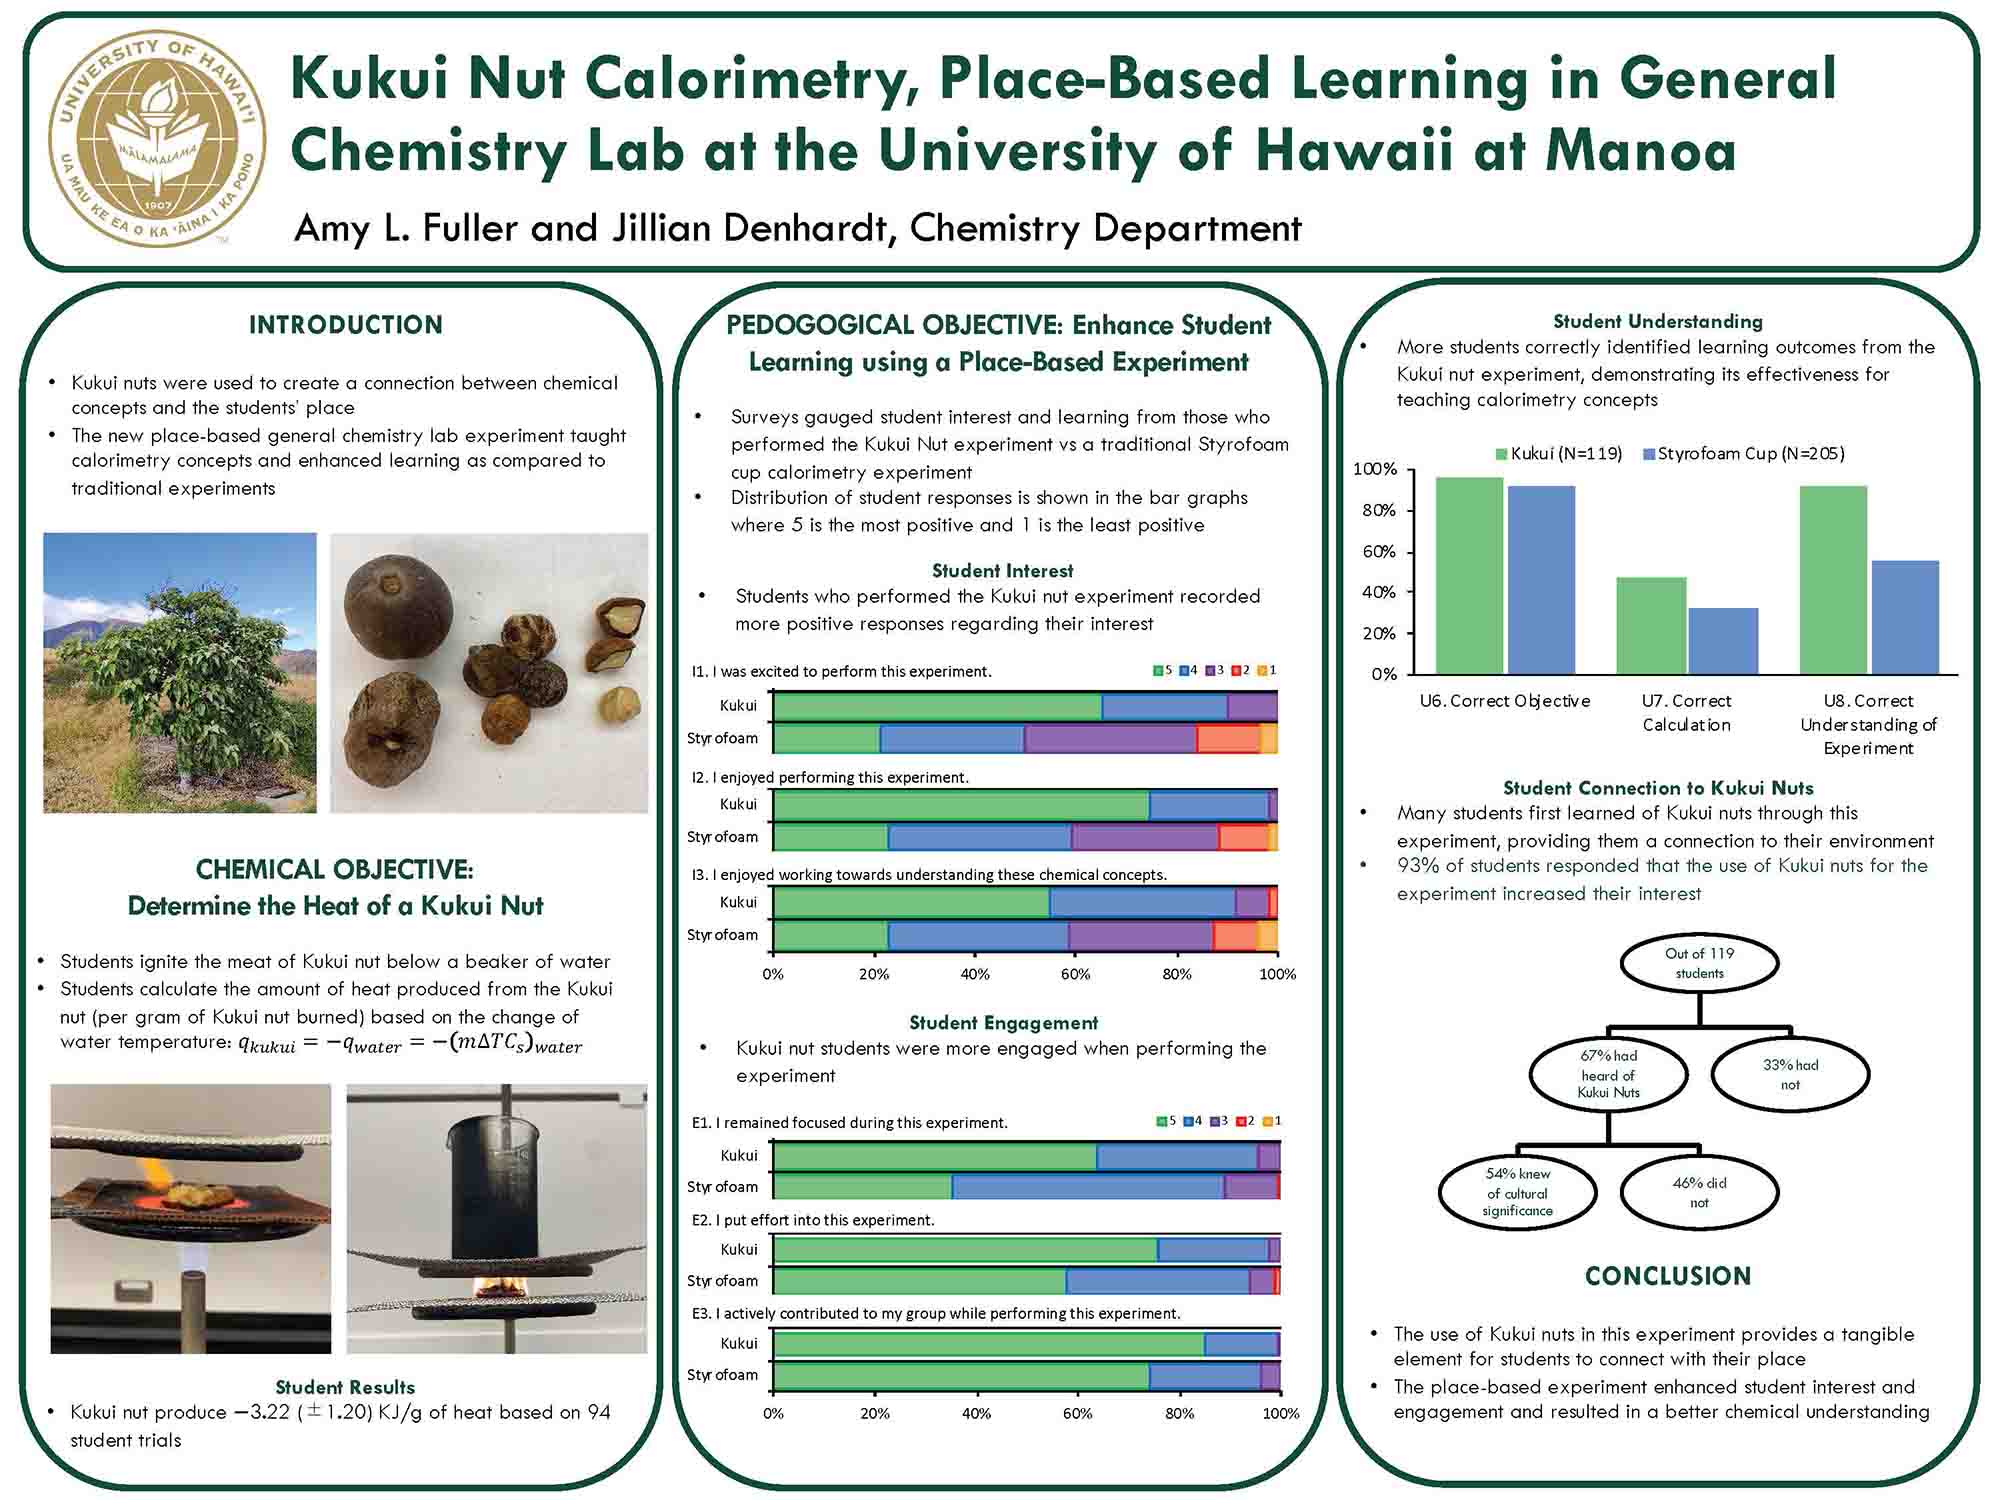 Kukui Nut Calorimetry, Place-Based Learning in General Chemistry Lab at the University of Hawaii at Manoa